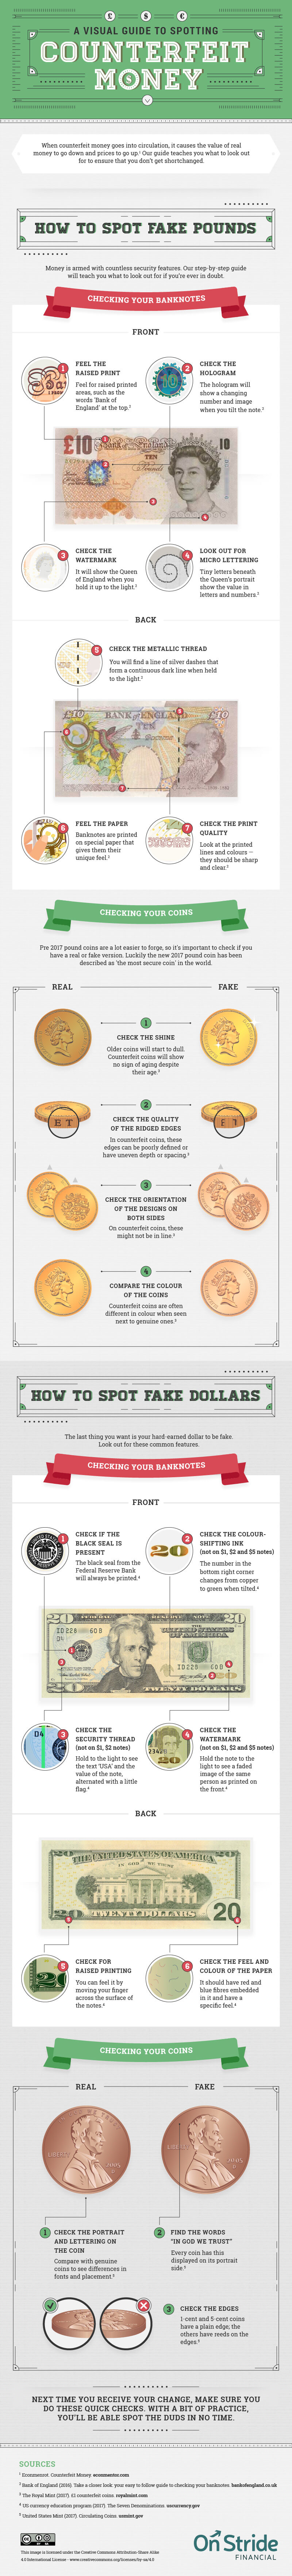 spotting counterfeit money guide